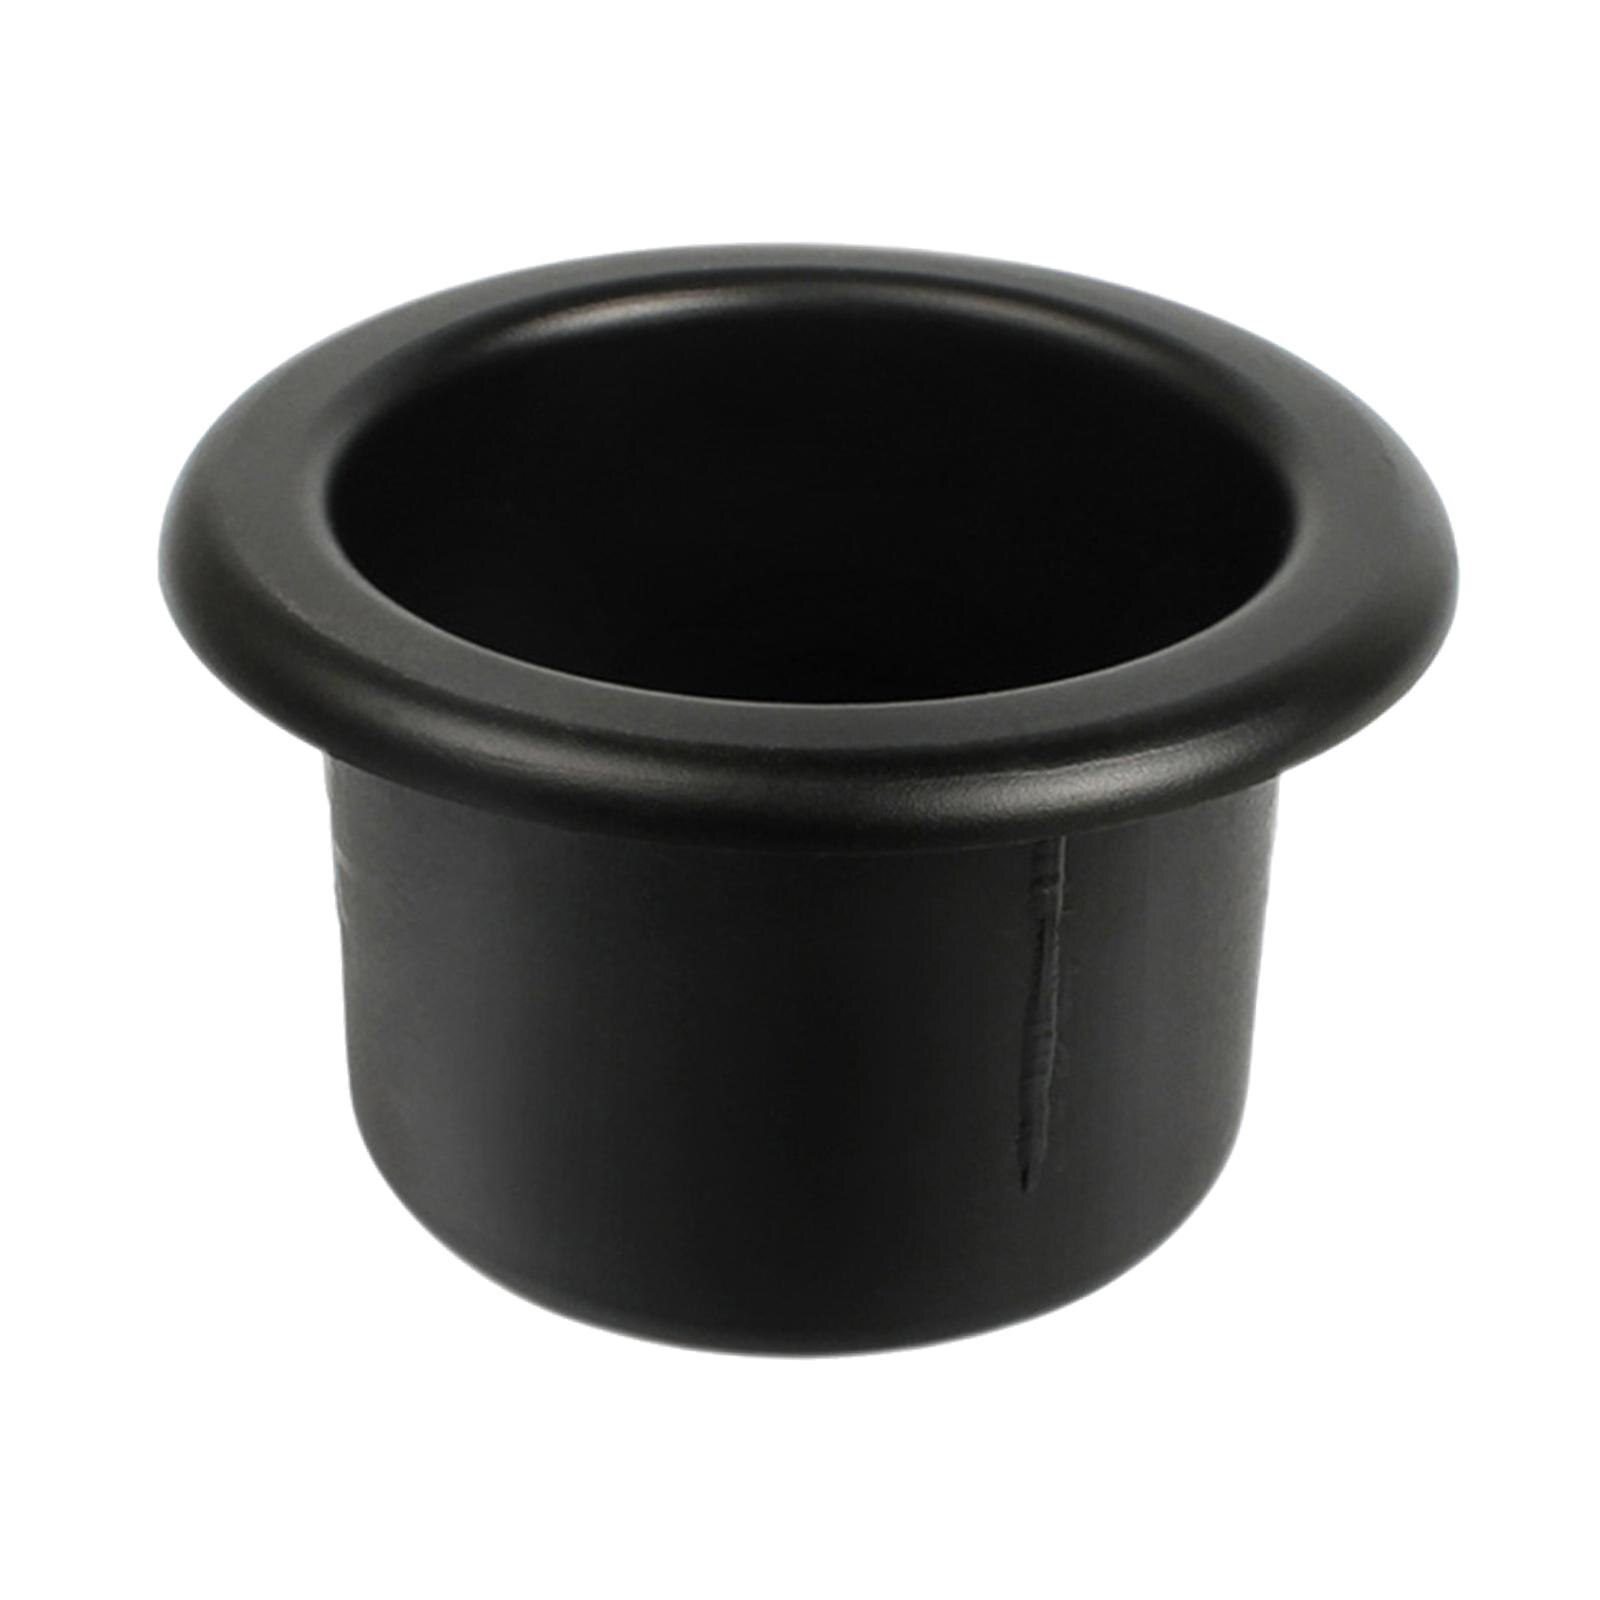 Cup Holder Washable Recessed Drop in Cup for Boat Table Couch